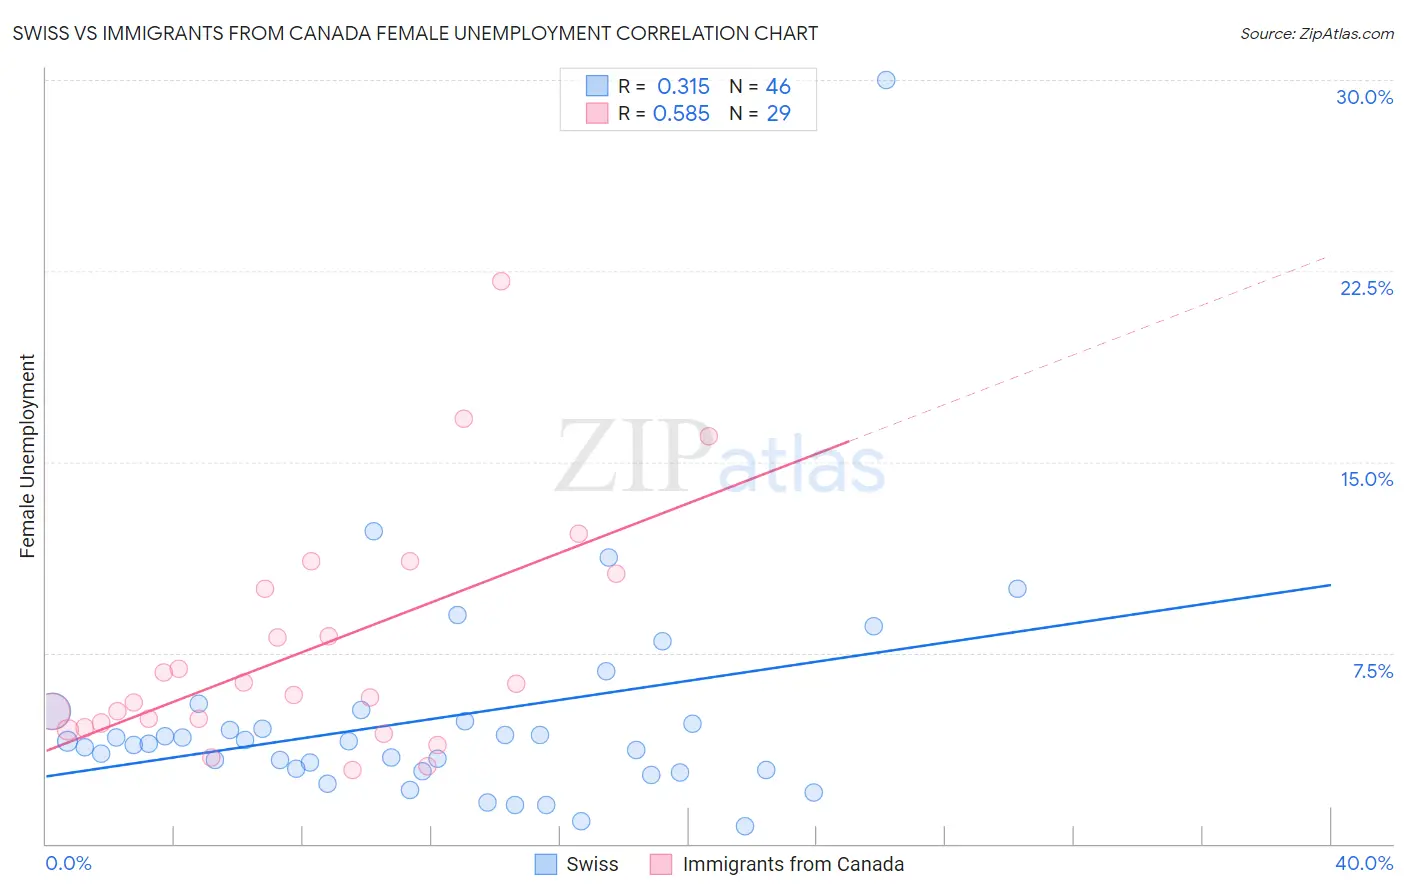 Swiss vs Immigrants from Canada Female Unemployment